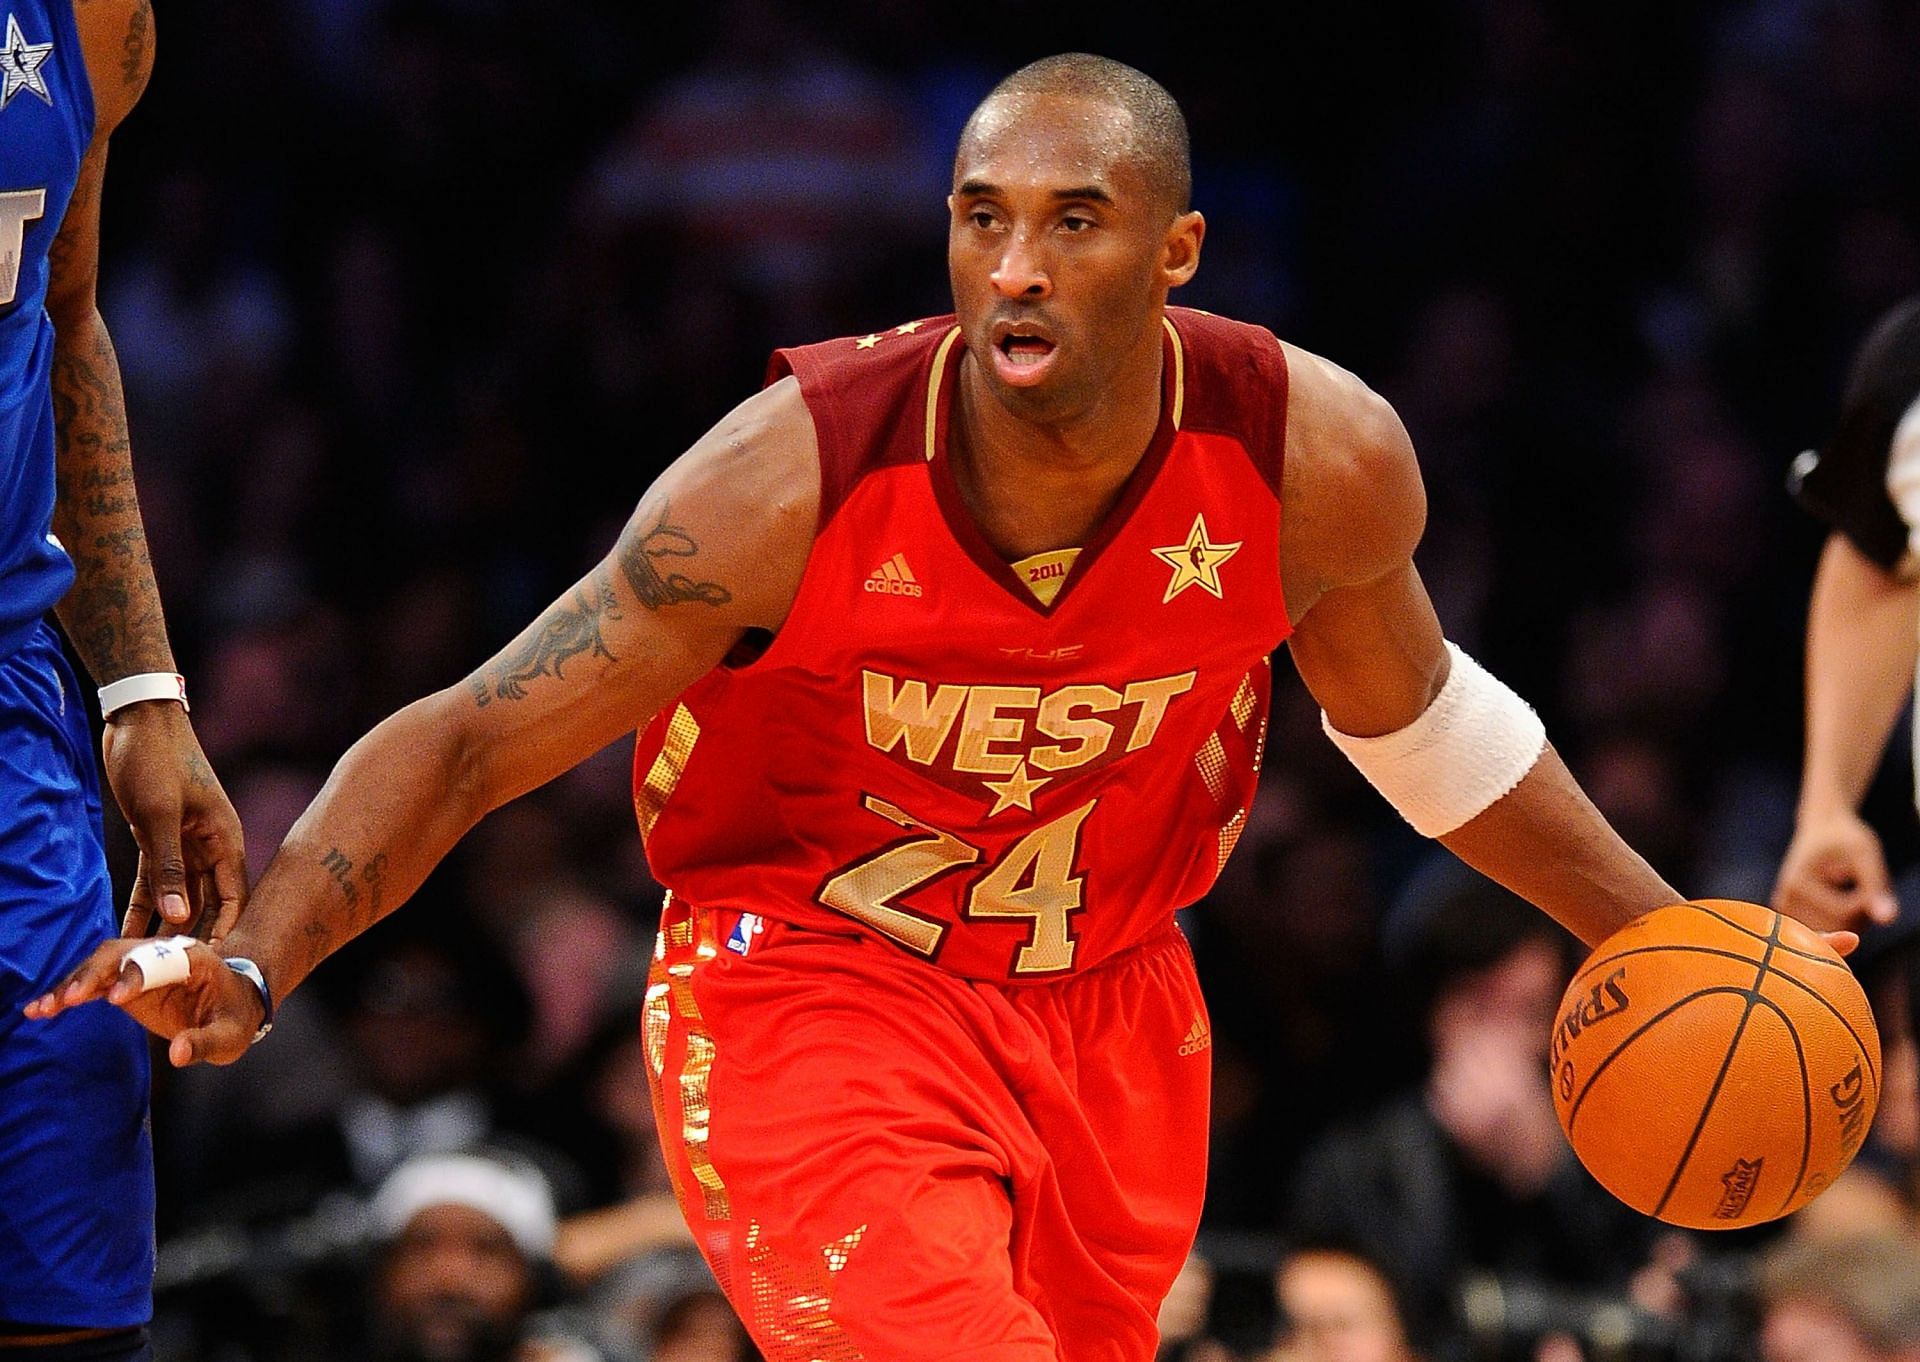 Kobe Bryant in action during the 2011 NBA All-Star Game